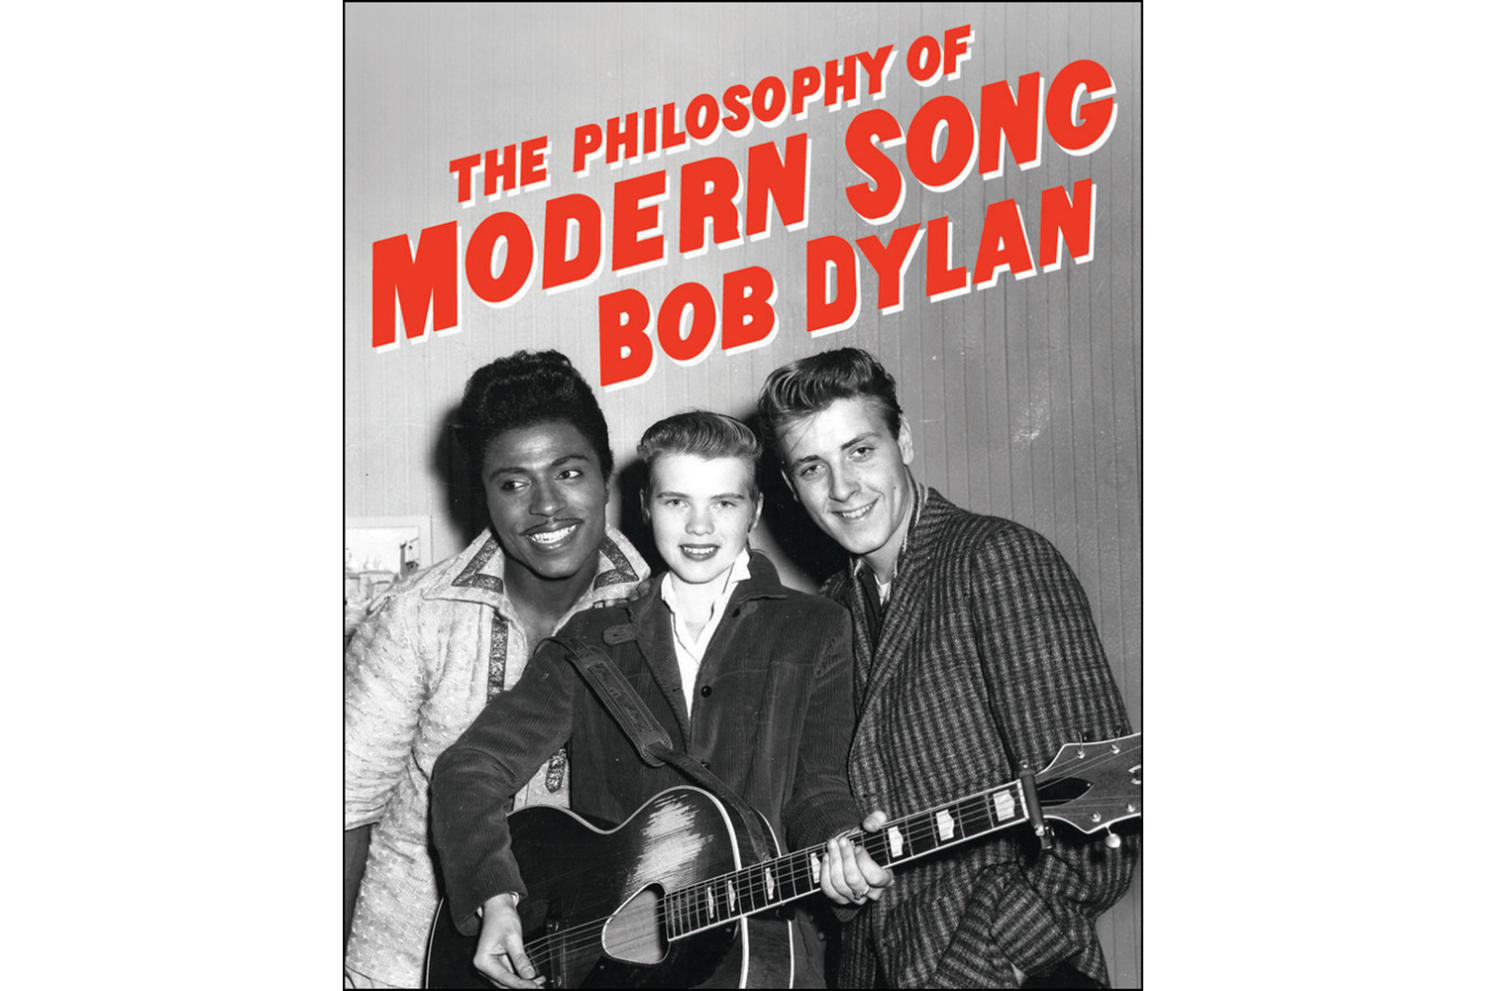 Bob Dylan's latest book, "The Philosophy of Modern Song," released soon_30.1